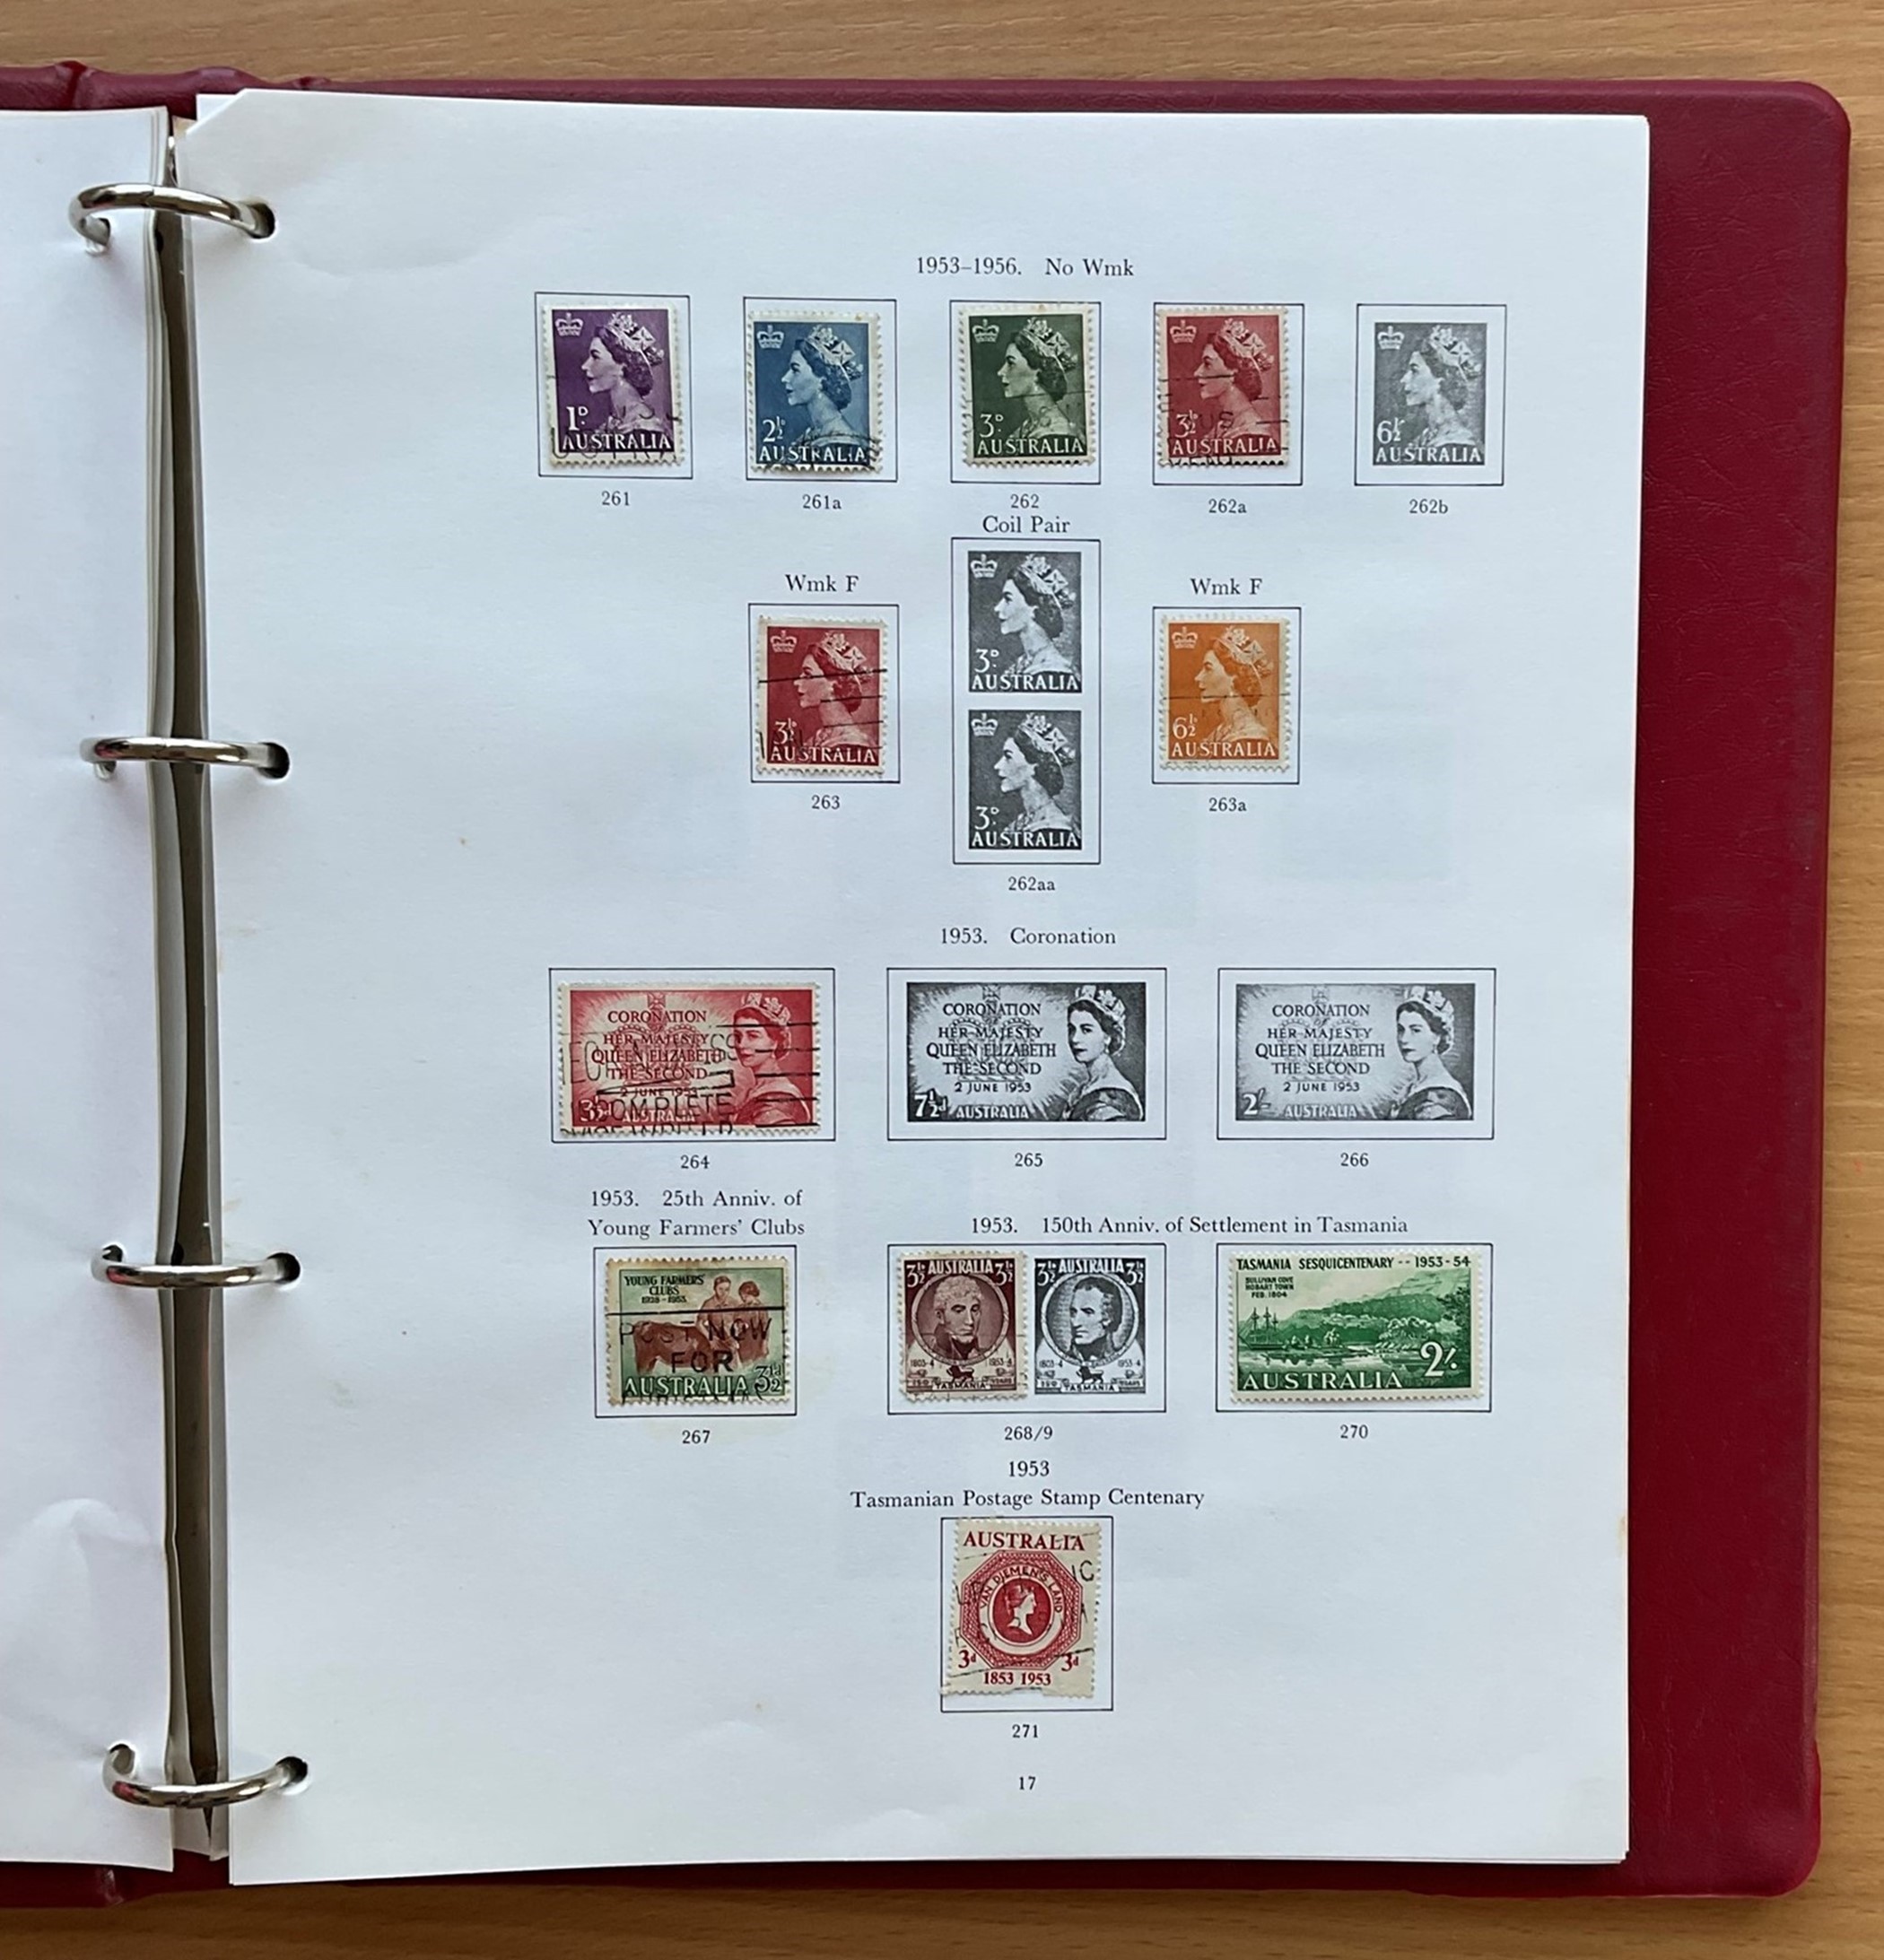 Stanley Gibbons Commonwealth of Australia Album with over 150 Stamps, has pictures and information - Image 2 of 3